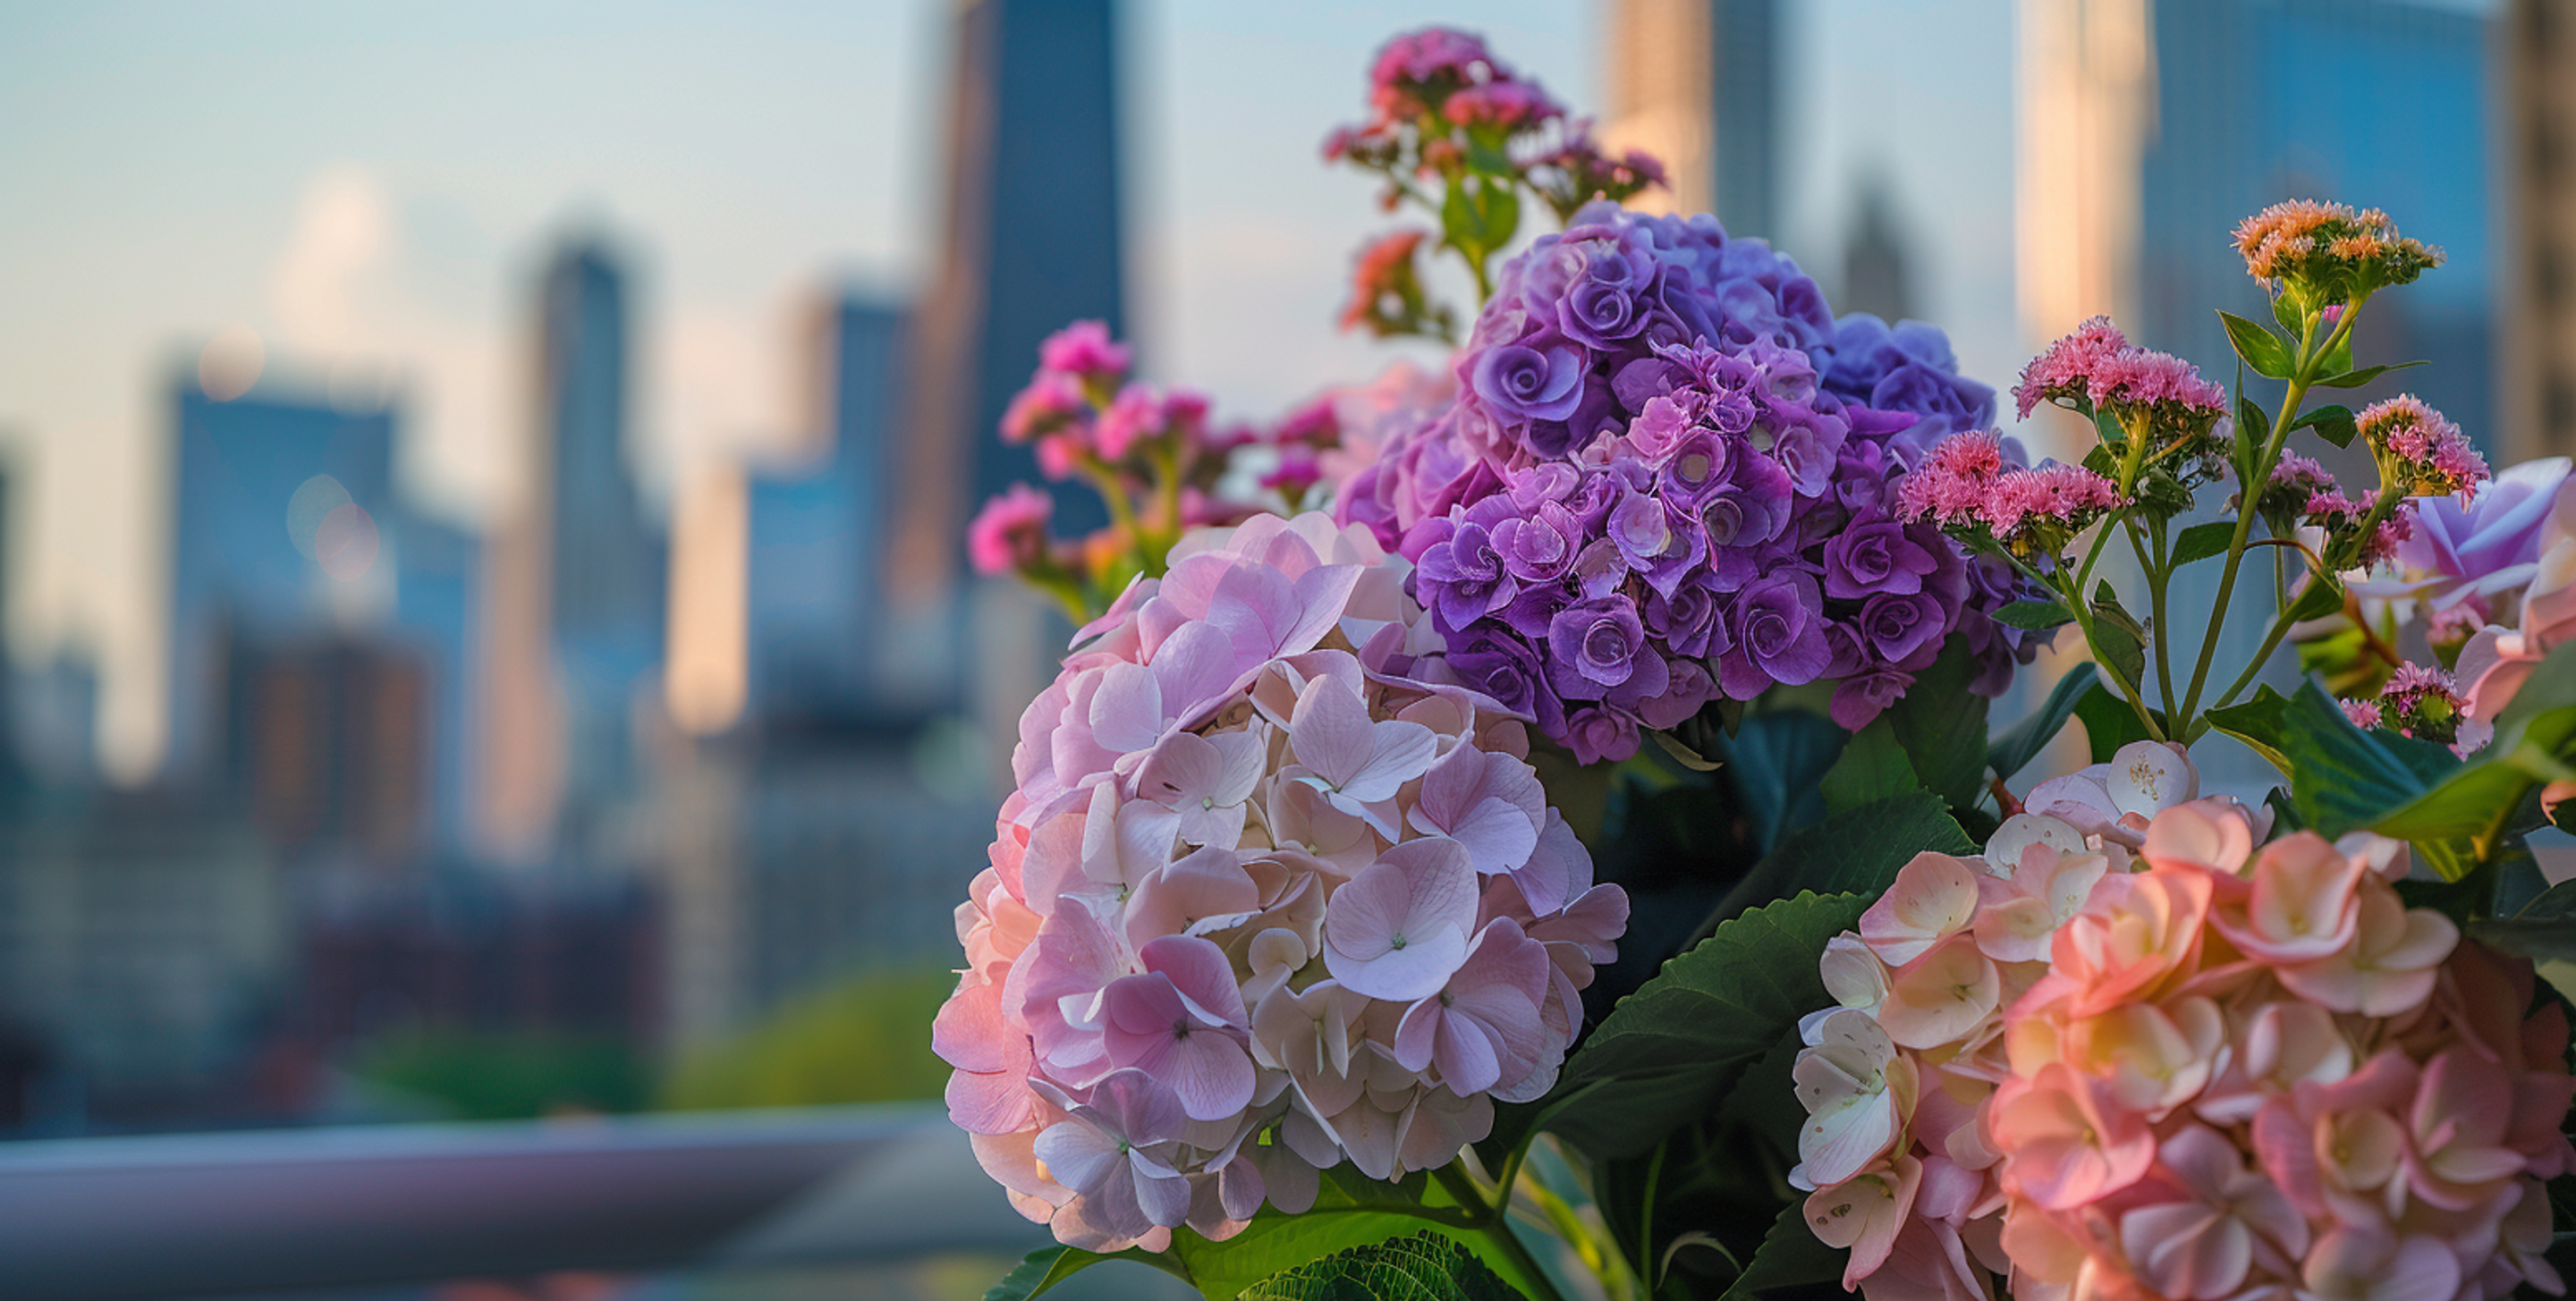 Purple Hydrangeas, Pink Peonies, and Cream Ranunculus in foreground with the Chicago skyline in the background featuring the Willis tower.